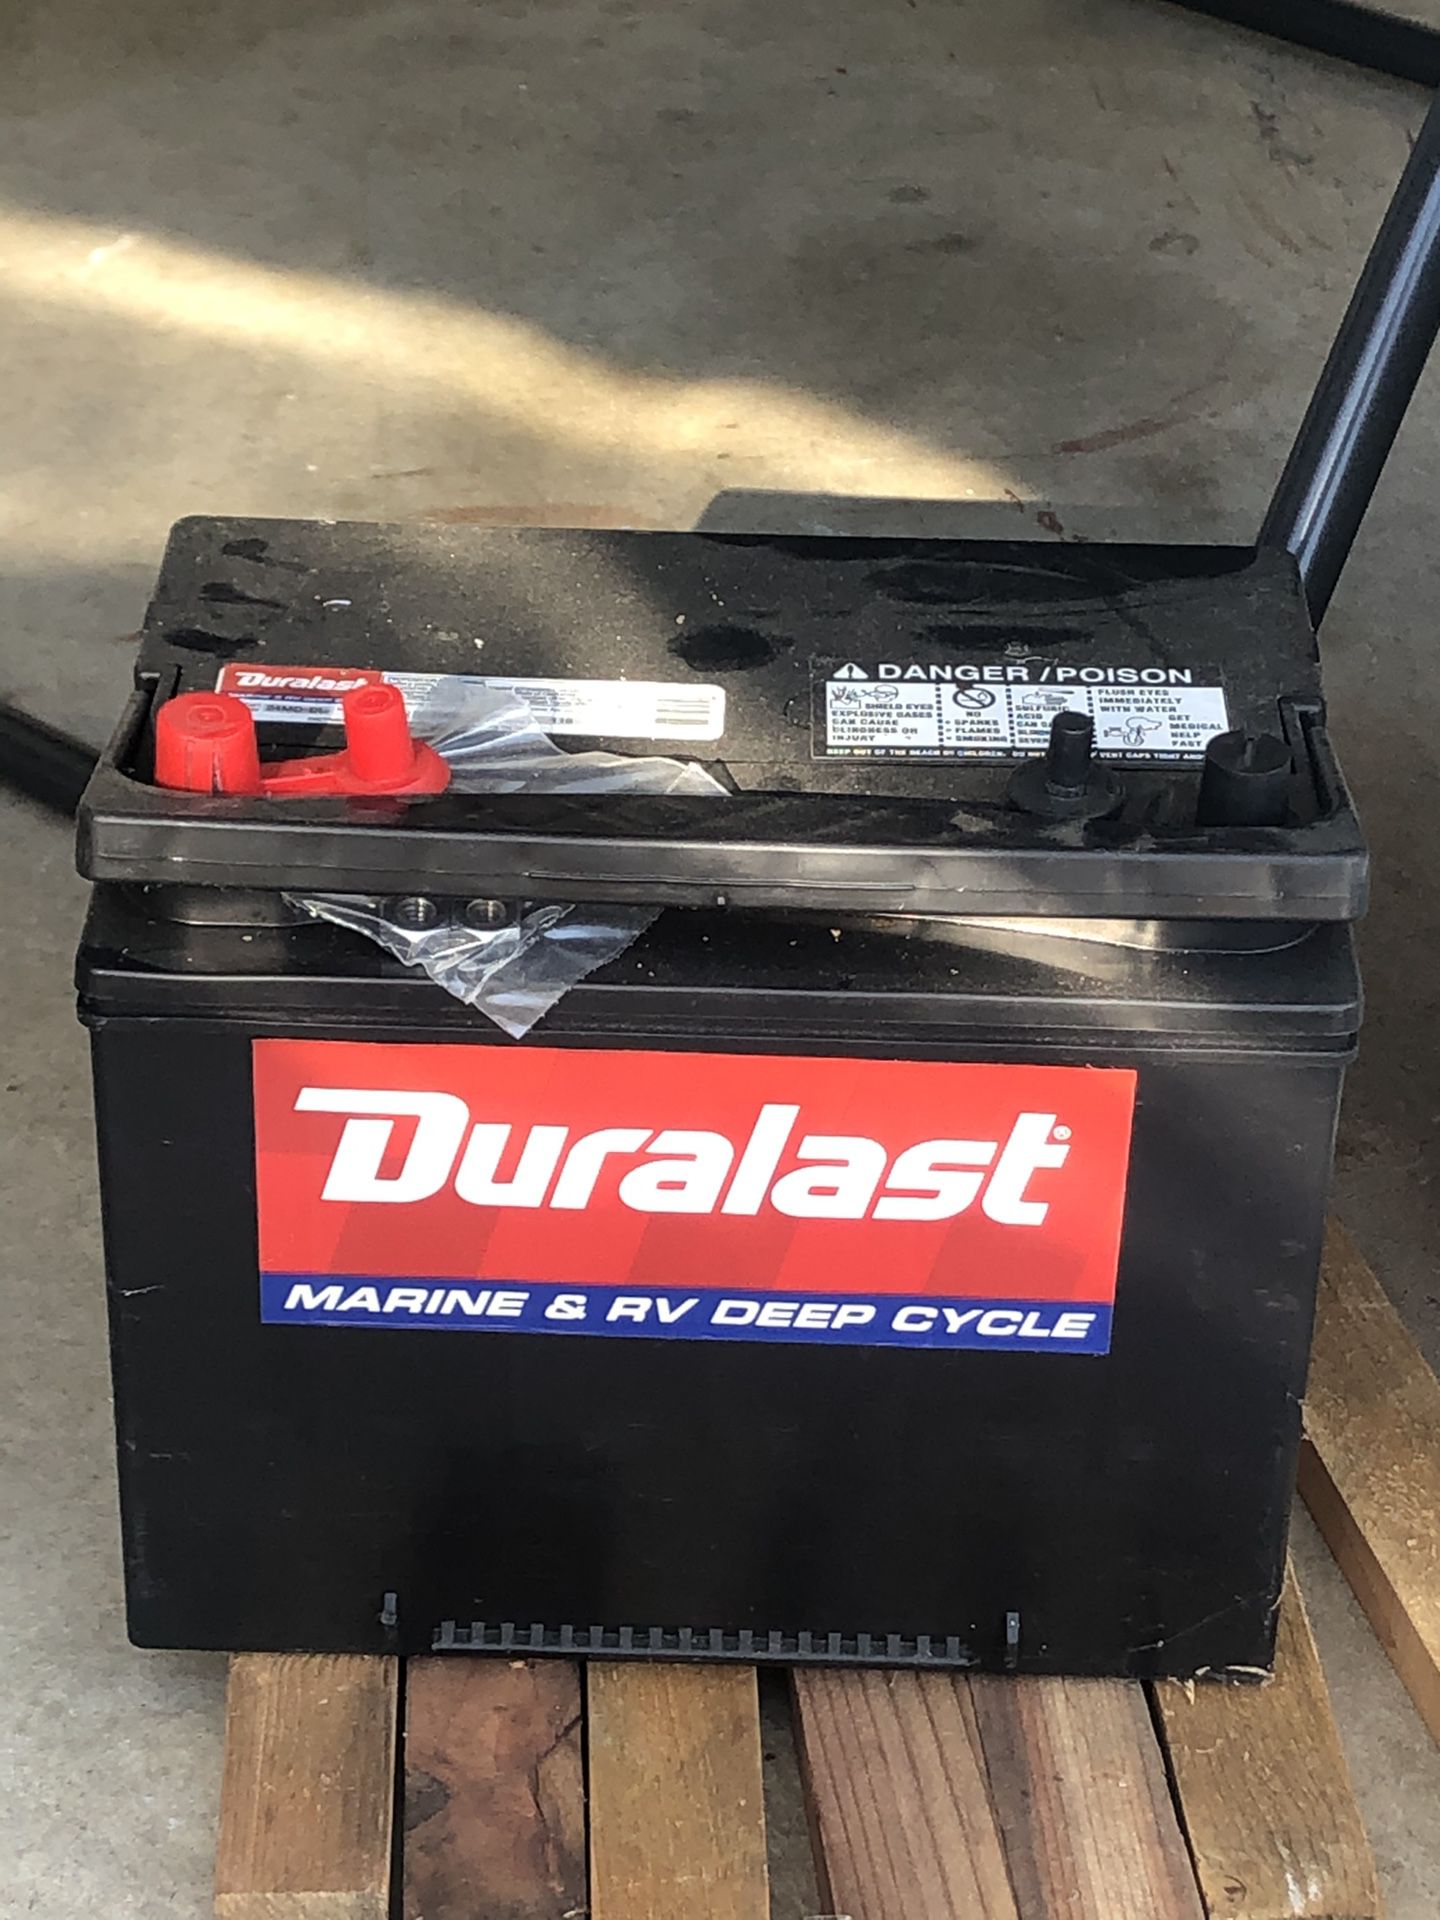 New Duralast marine and RV deep cycle battery